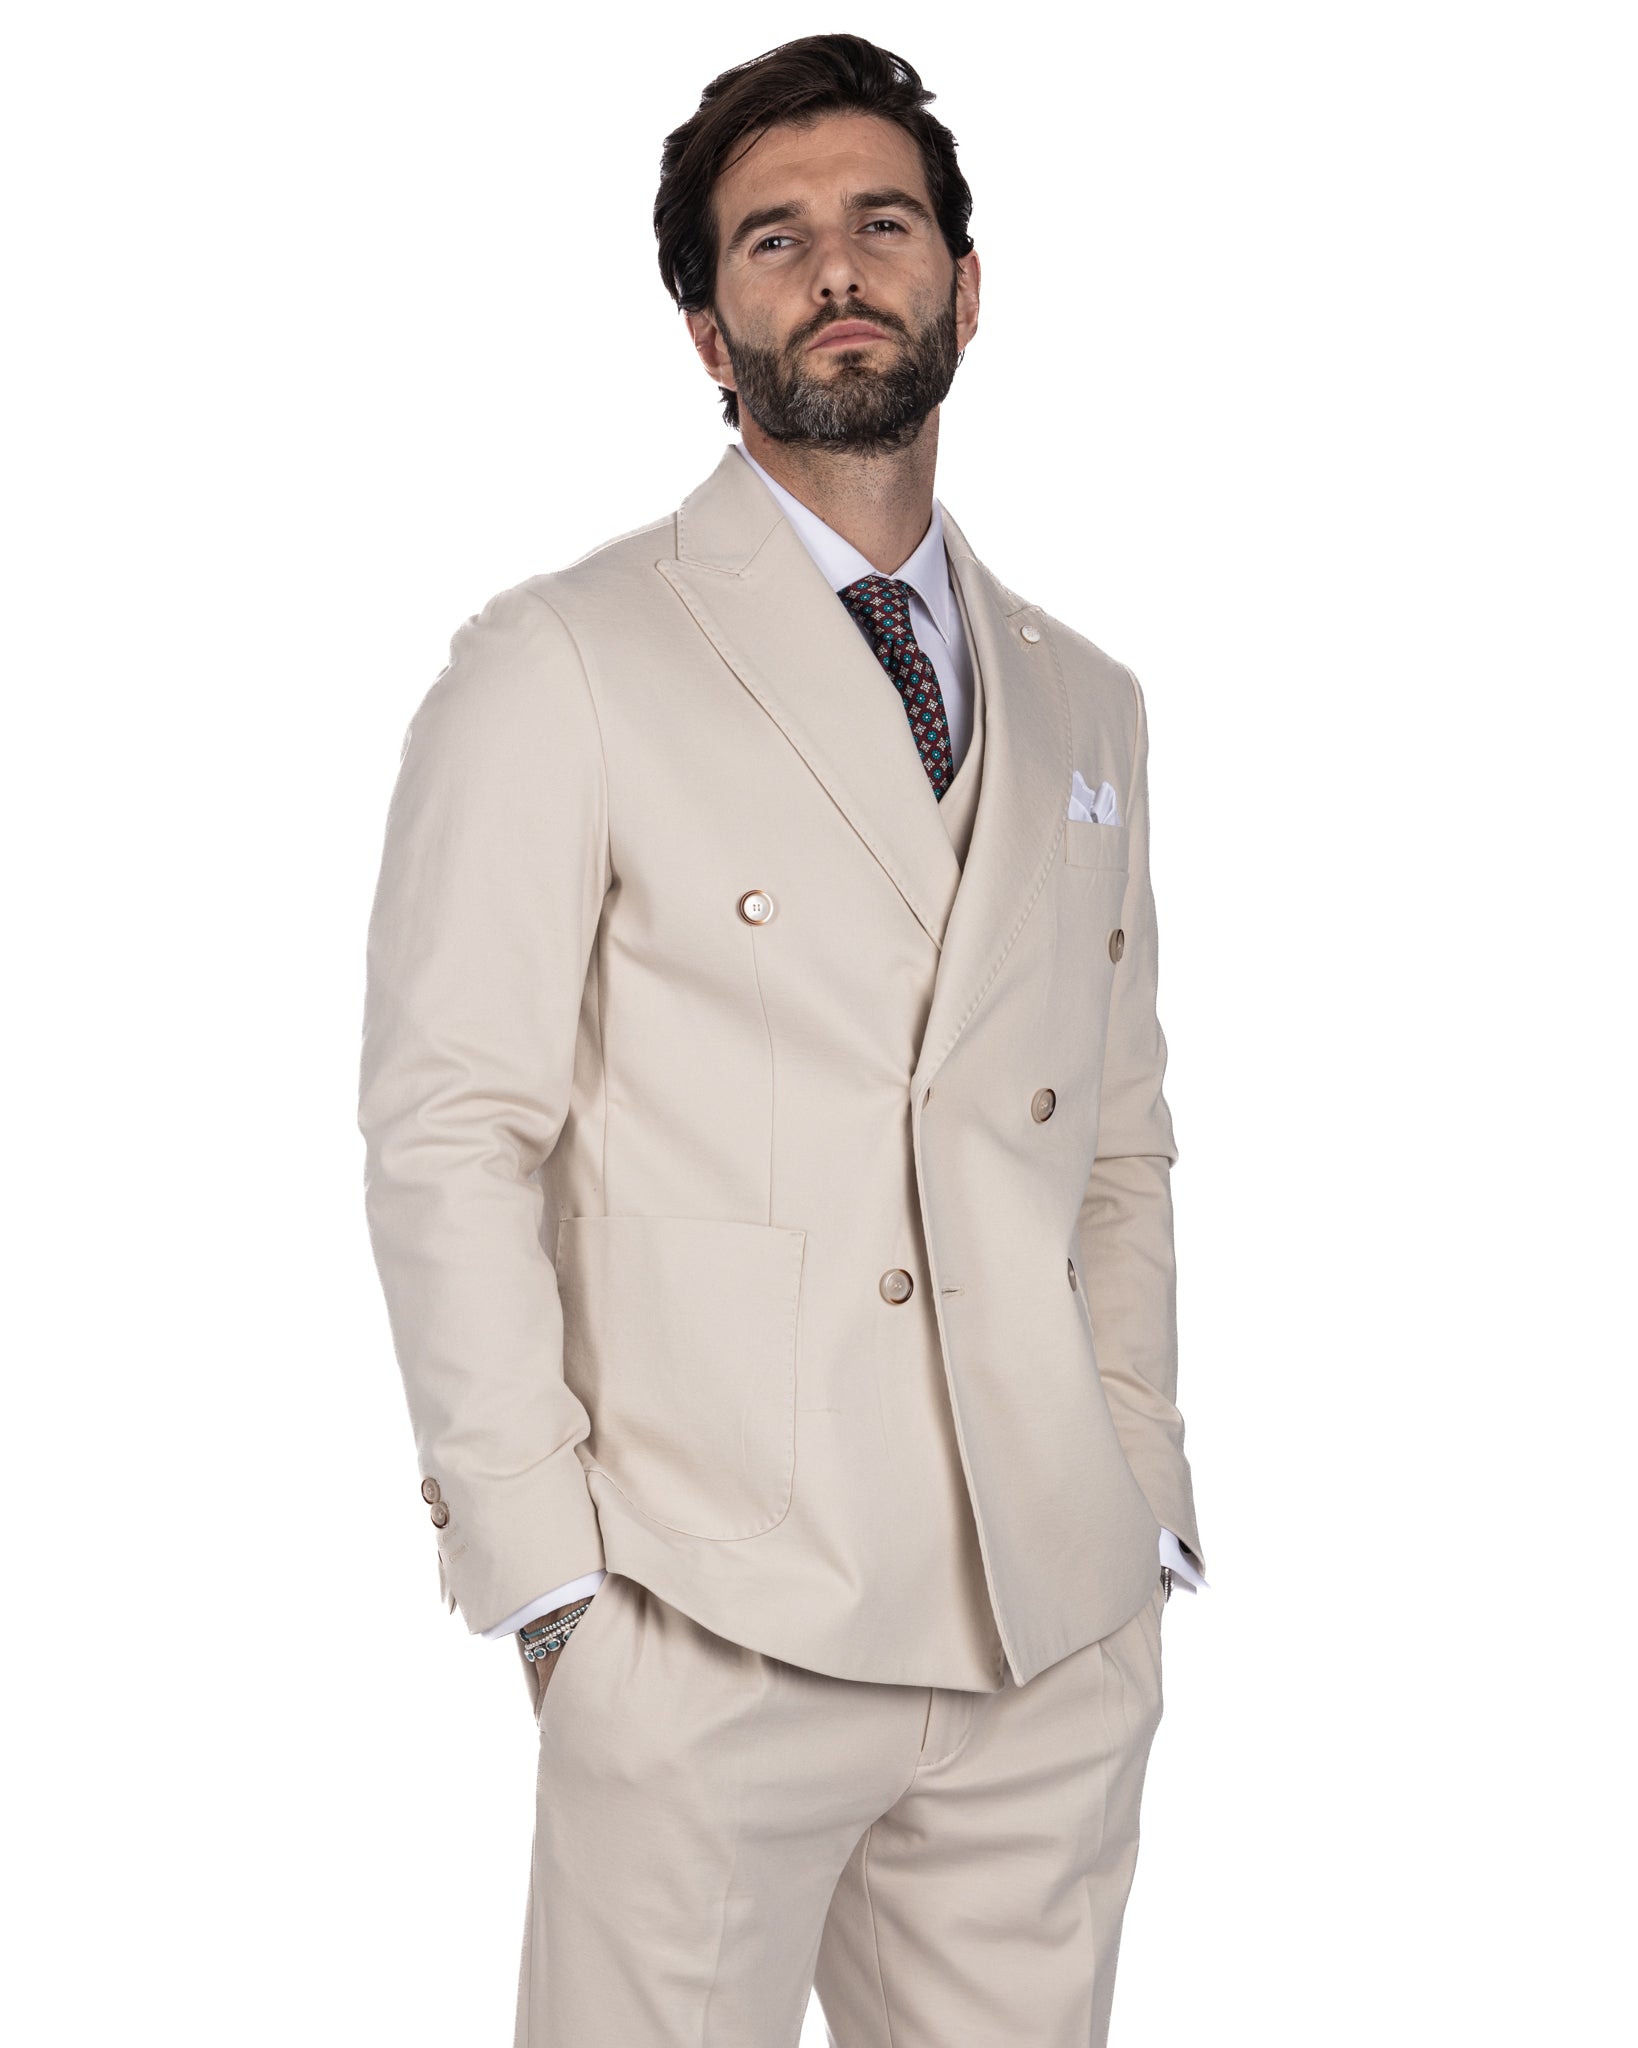 Mustang - cream Milan stitch double-breasted jacket